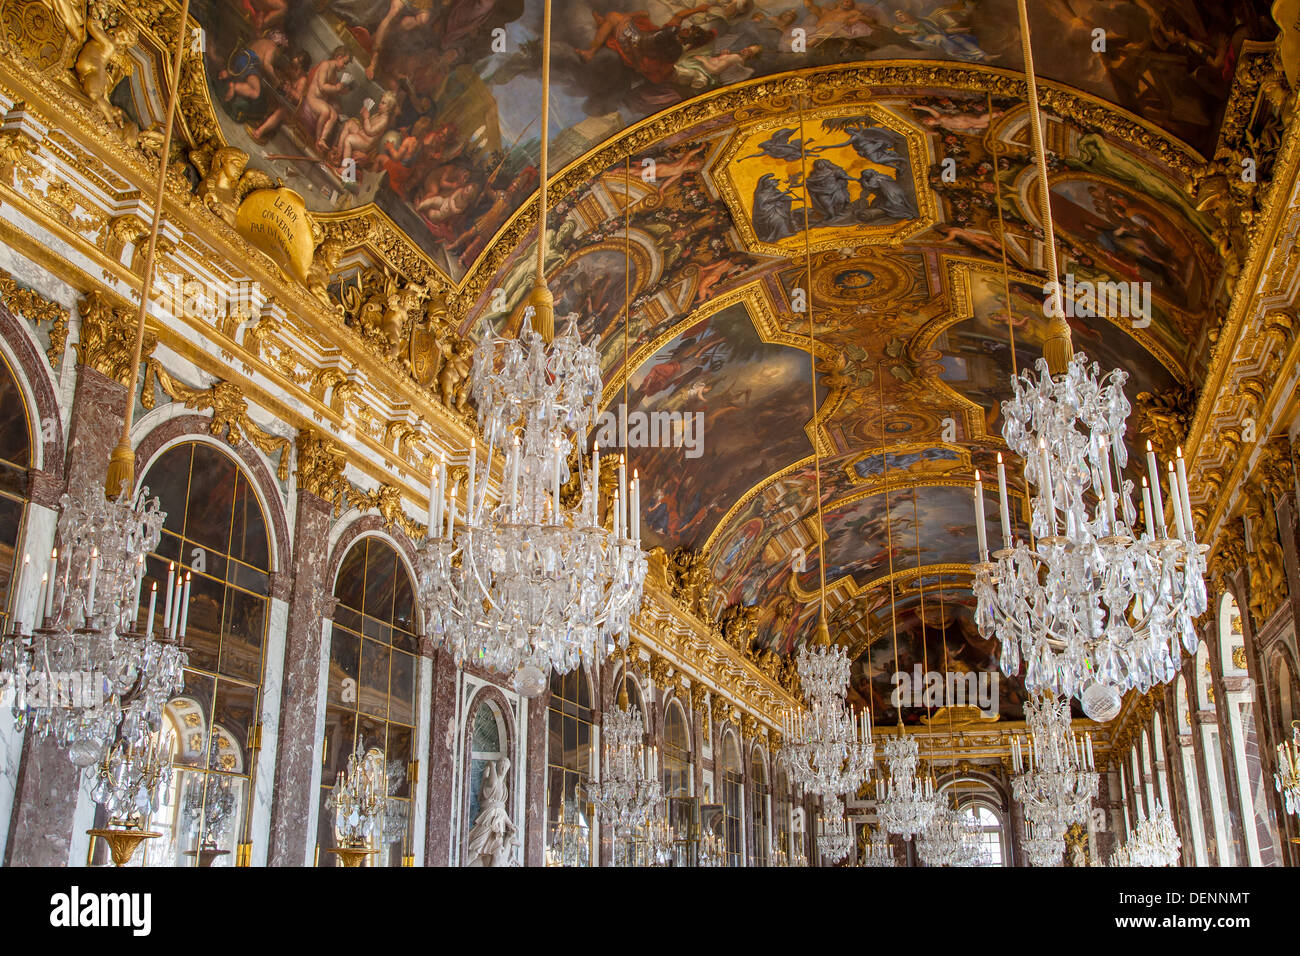 Ceiling and chandeliers (Lustre) in the Hall of Mirrors, Chateau de  Versailles, France Stock Photo - Alamy